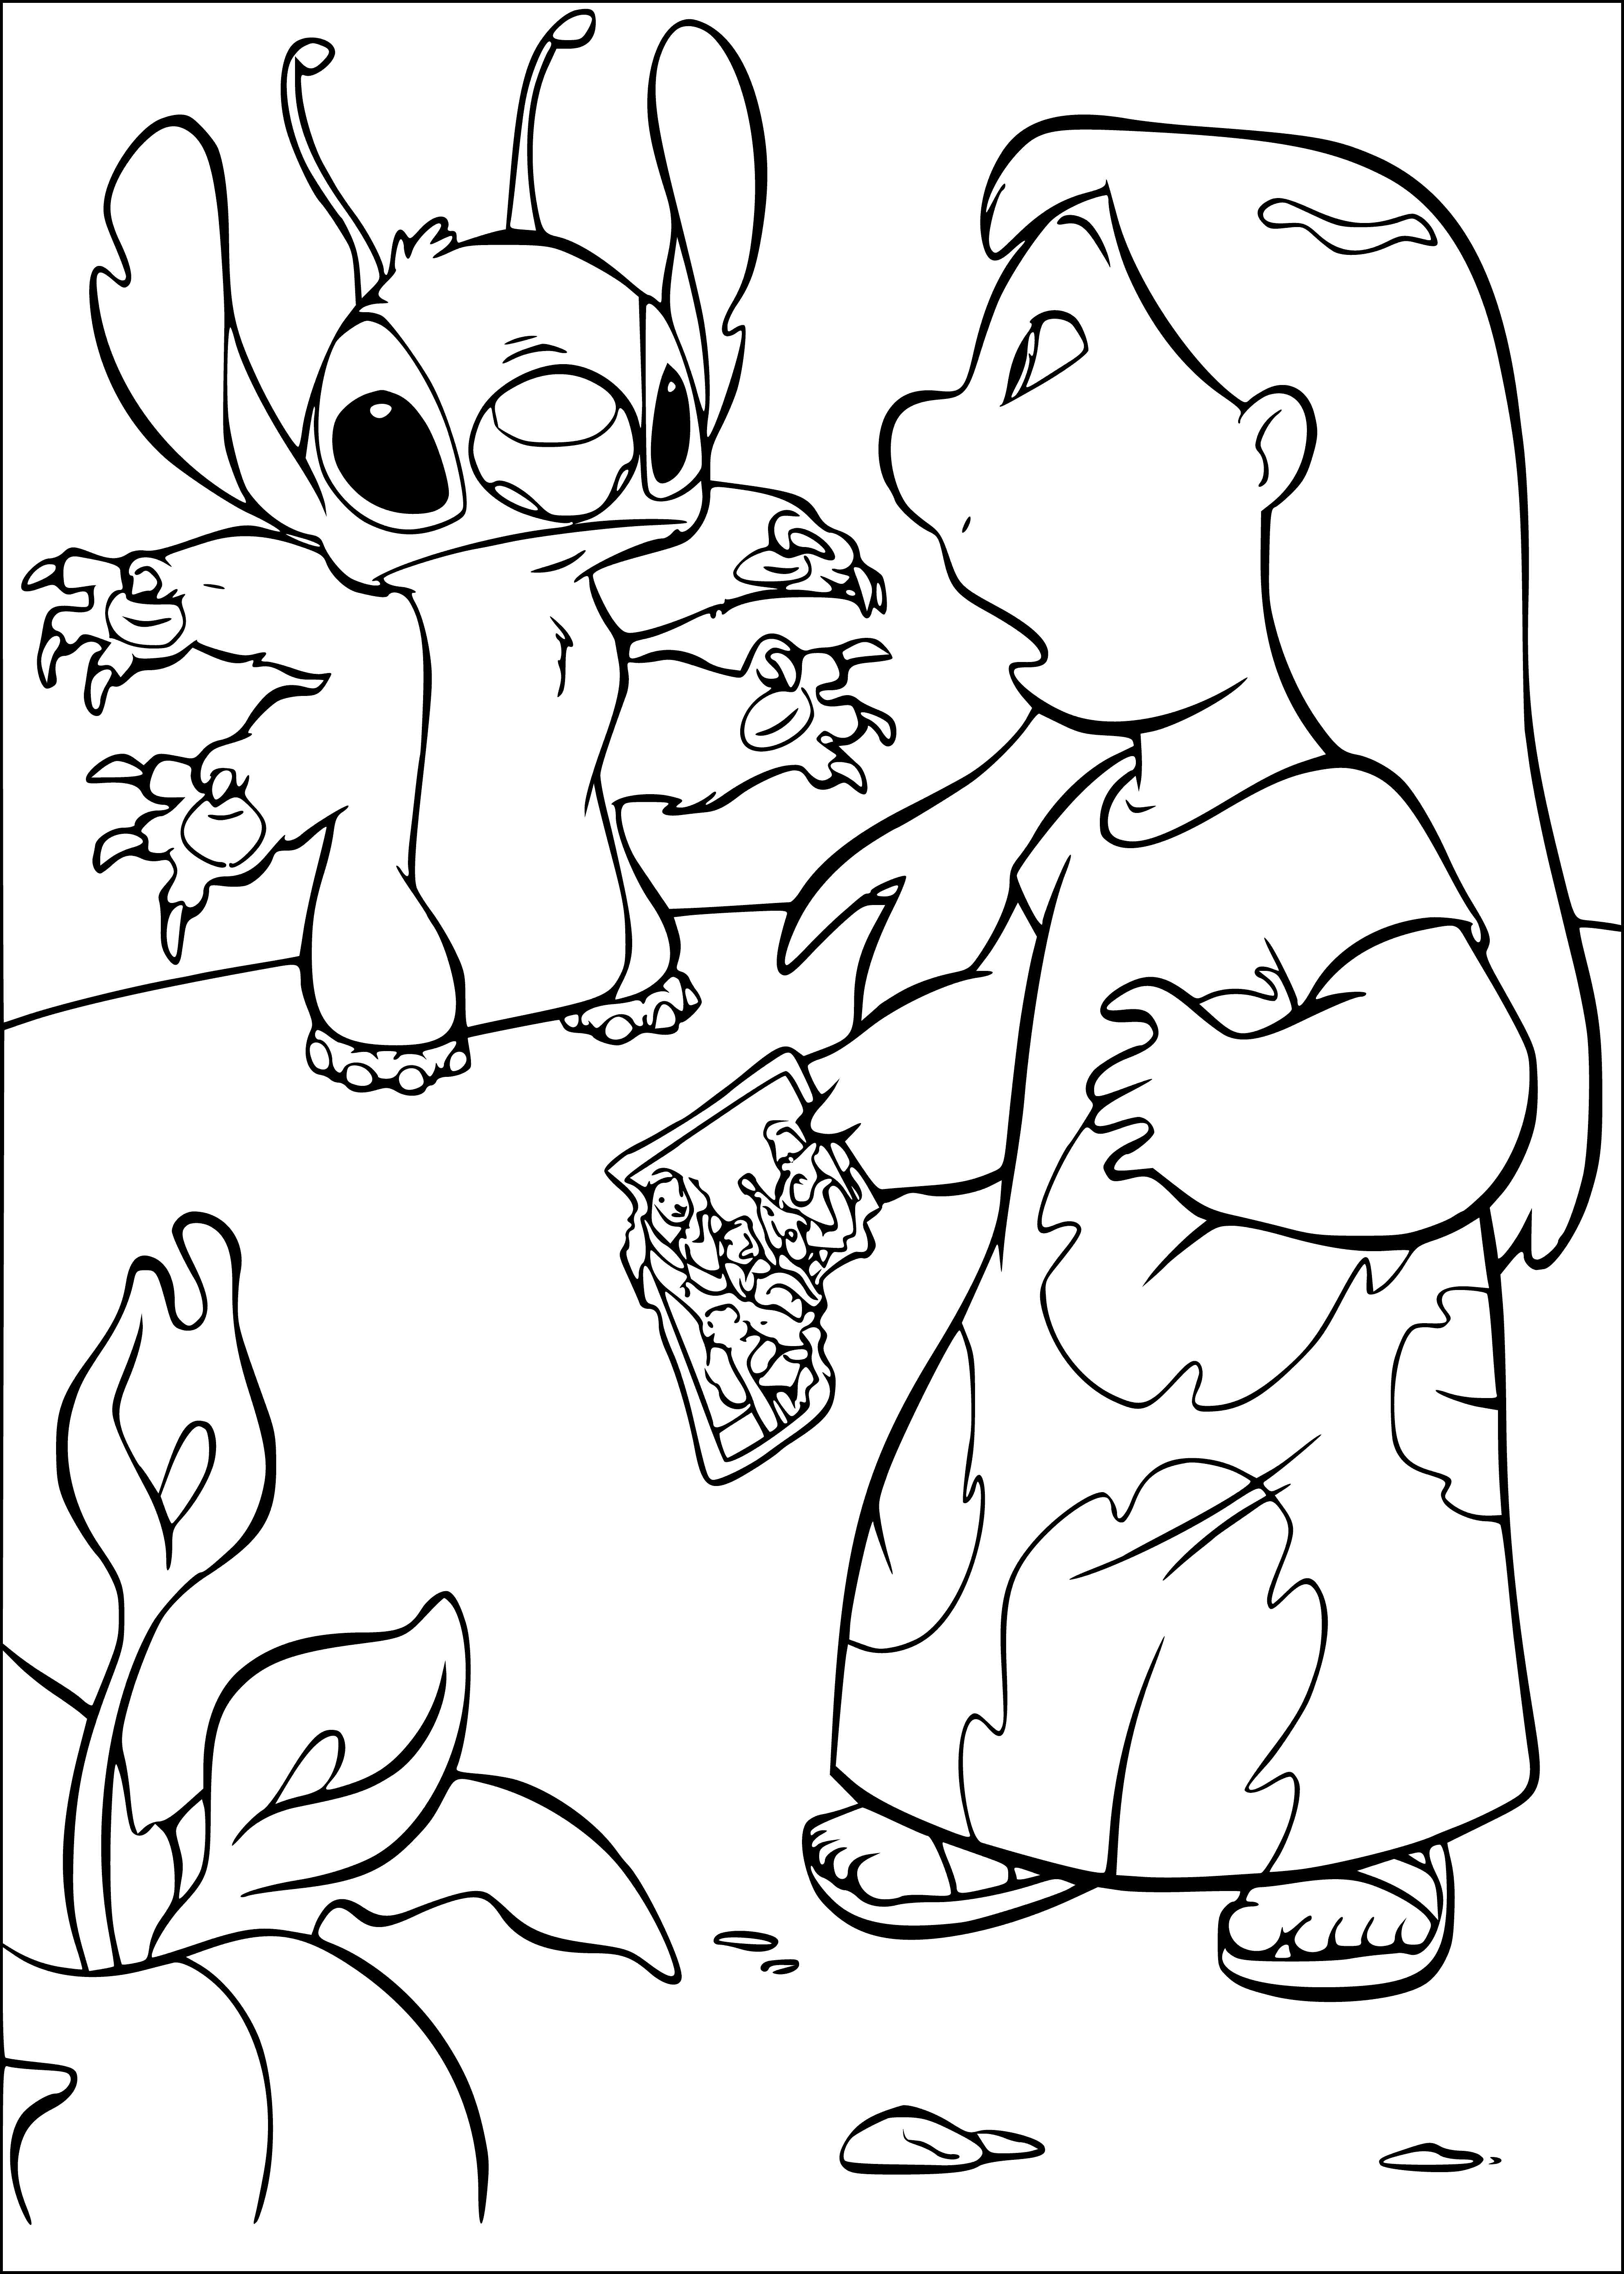 coloring page: Stitch is a small blue alien with six legs, two arms, wearing a red shirt and blue shorts, with a backpack of both colors.